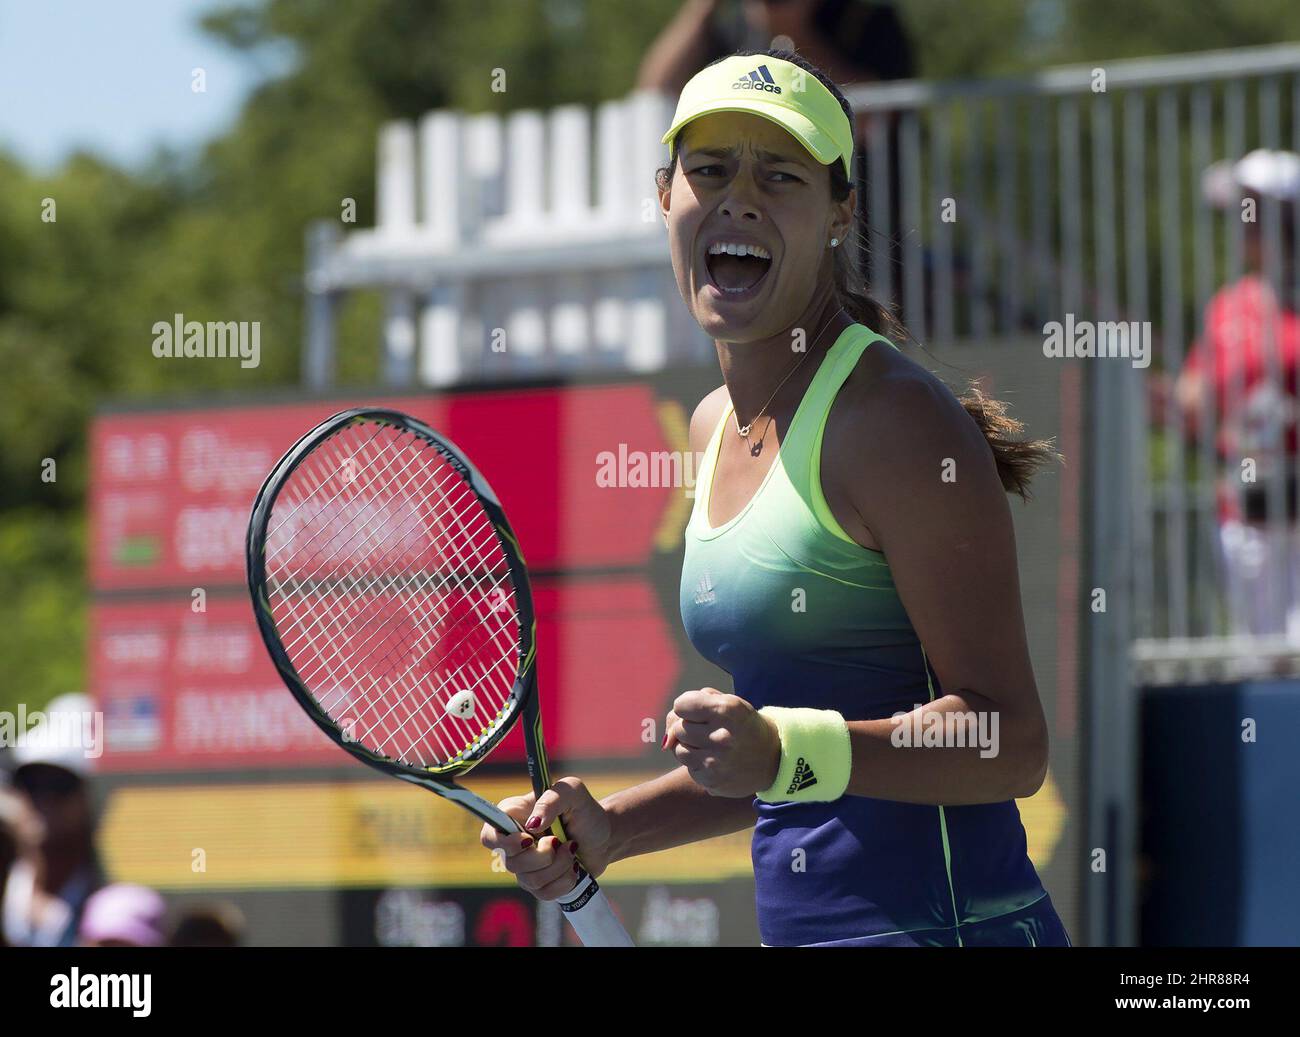 Ana Ivanovic of Serbia celebrates her victory over Olga Govortsova of  Belarus during tennis action at Rogers Cup in Toronto on Wednesday August  12, 2015. THE CANADIAN PRESS/Frank Gunn Stock Photo - Alamy